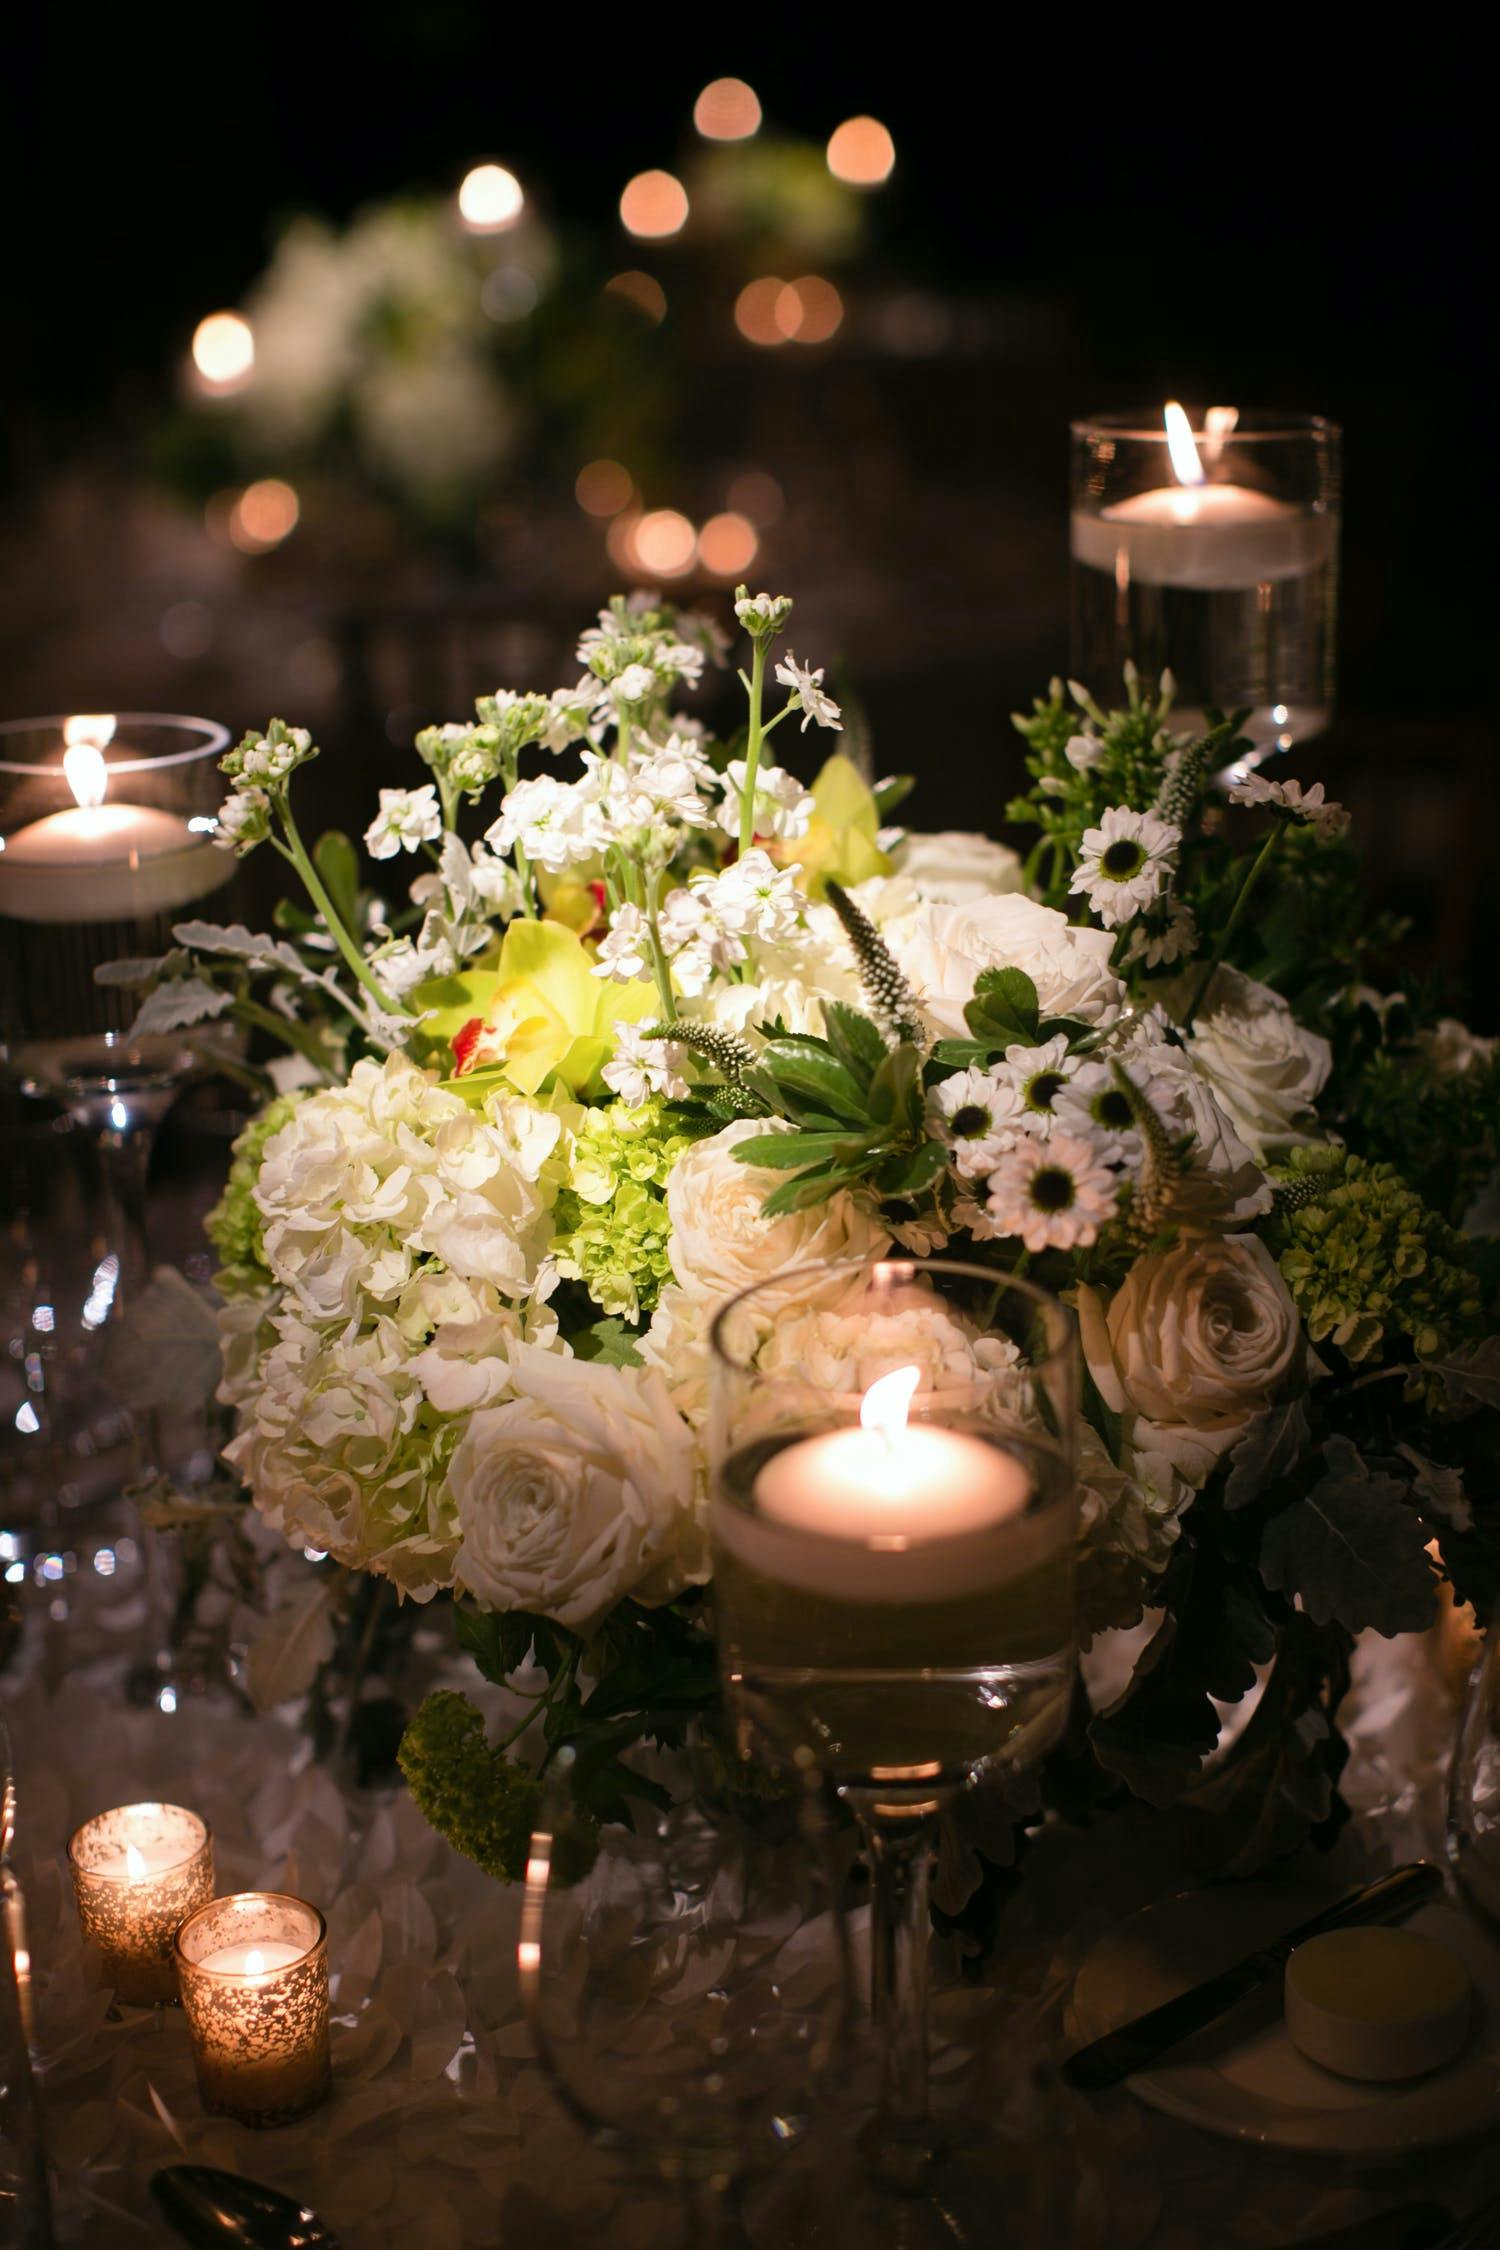 Close up of white hydrangea centerpiece with yellow-green accent blooms and an accompanying candlelight.